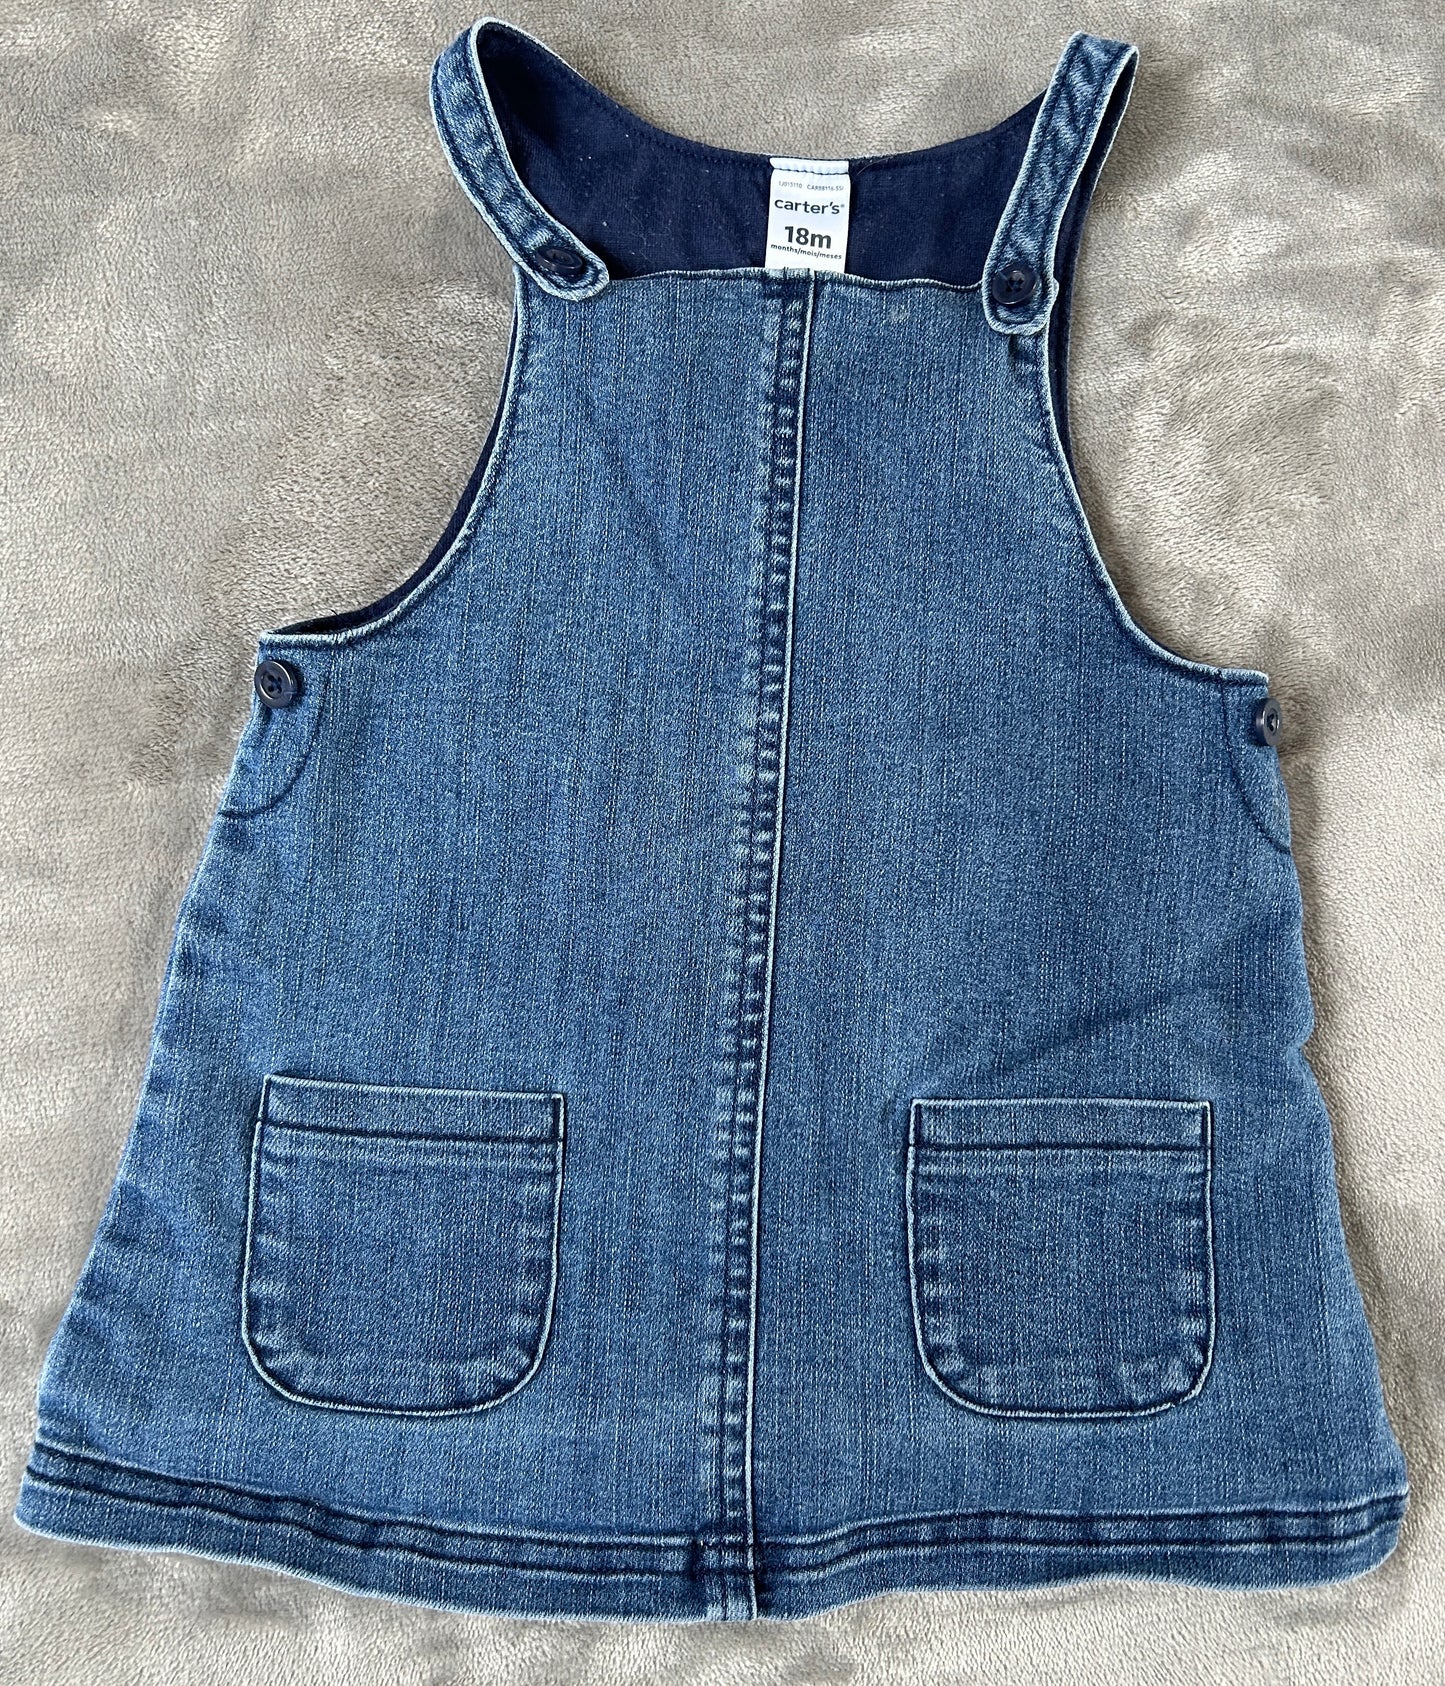 REDUCED Carters Jean Dress - 18m